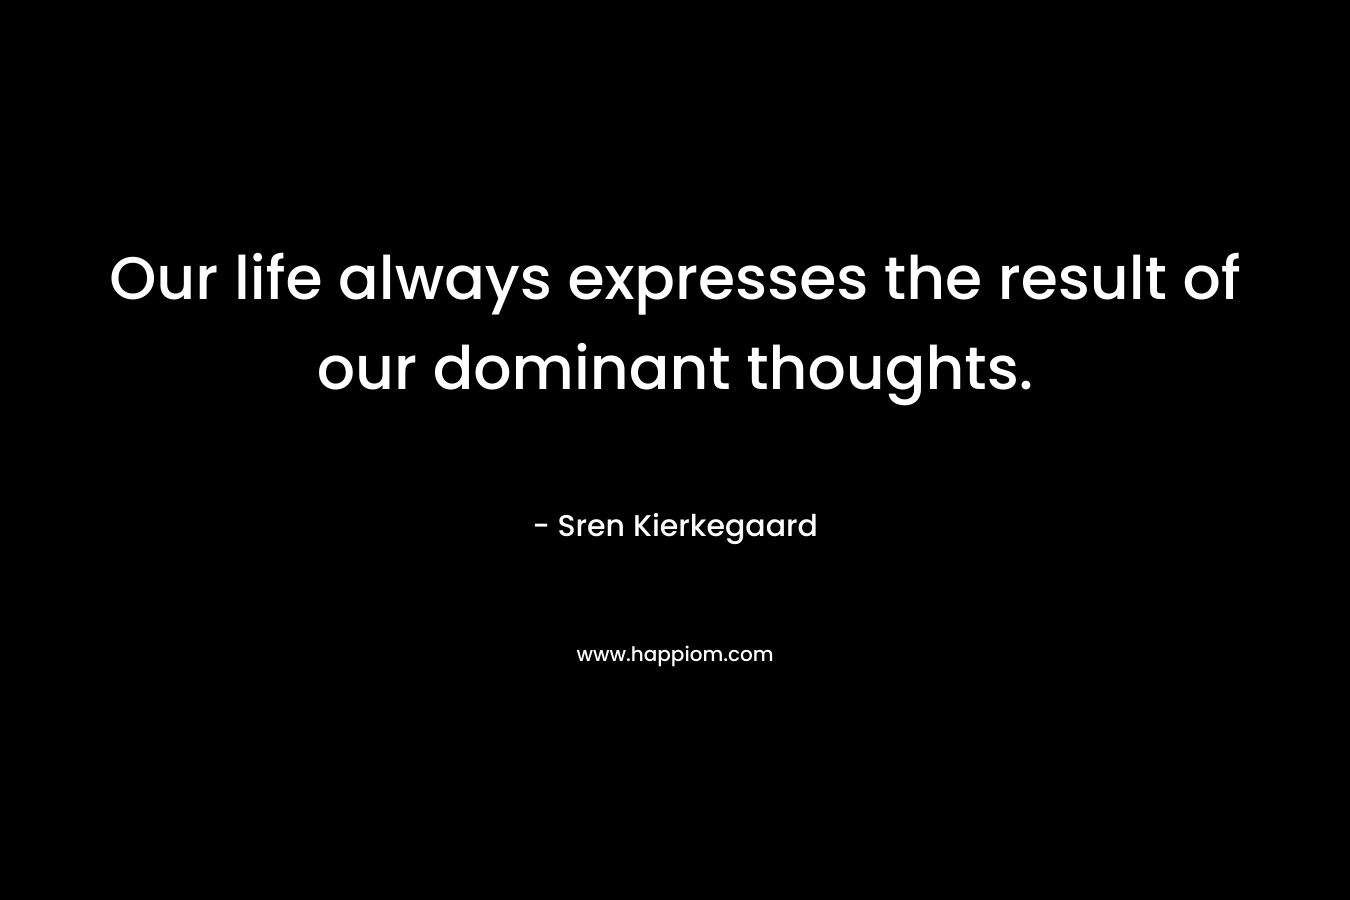 Our life always expresses the result of our dominant thoughts. – Sren Kierkegaard